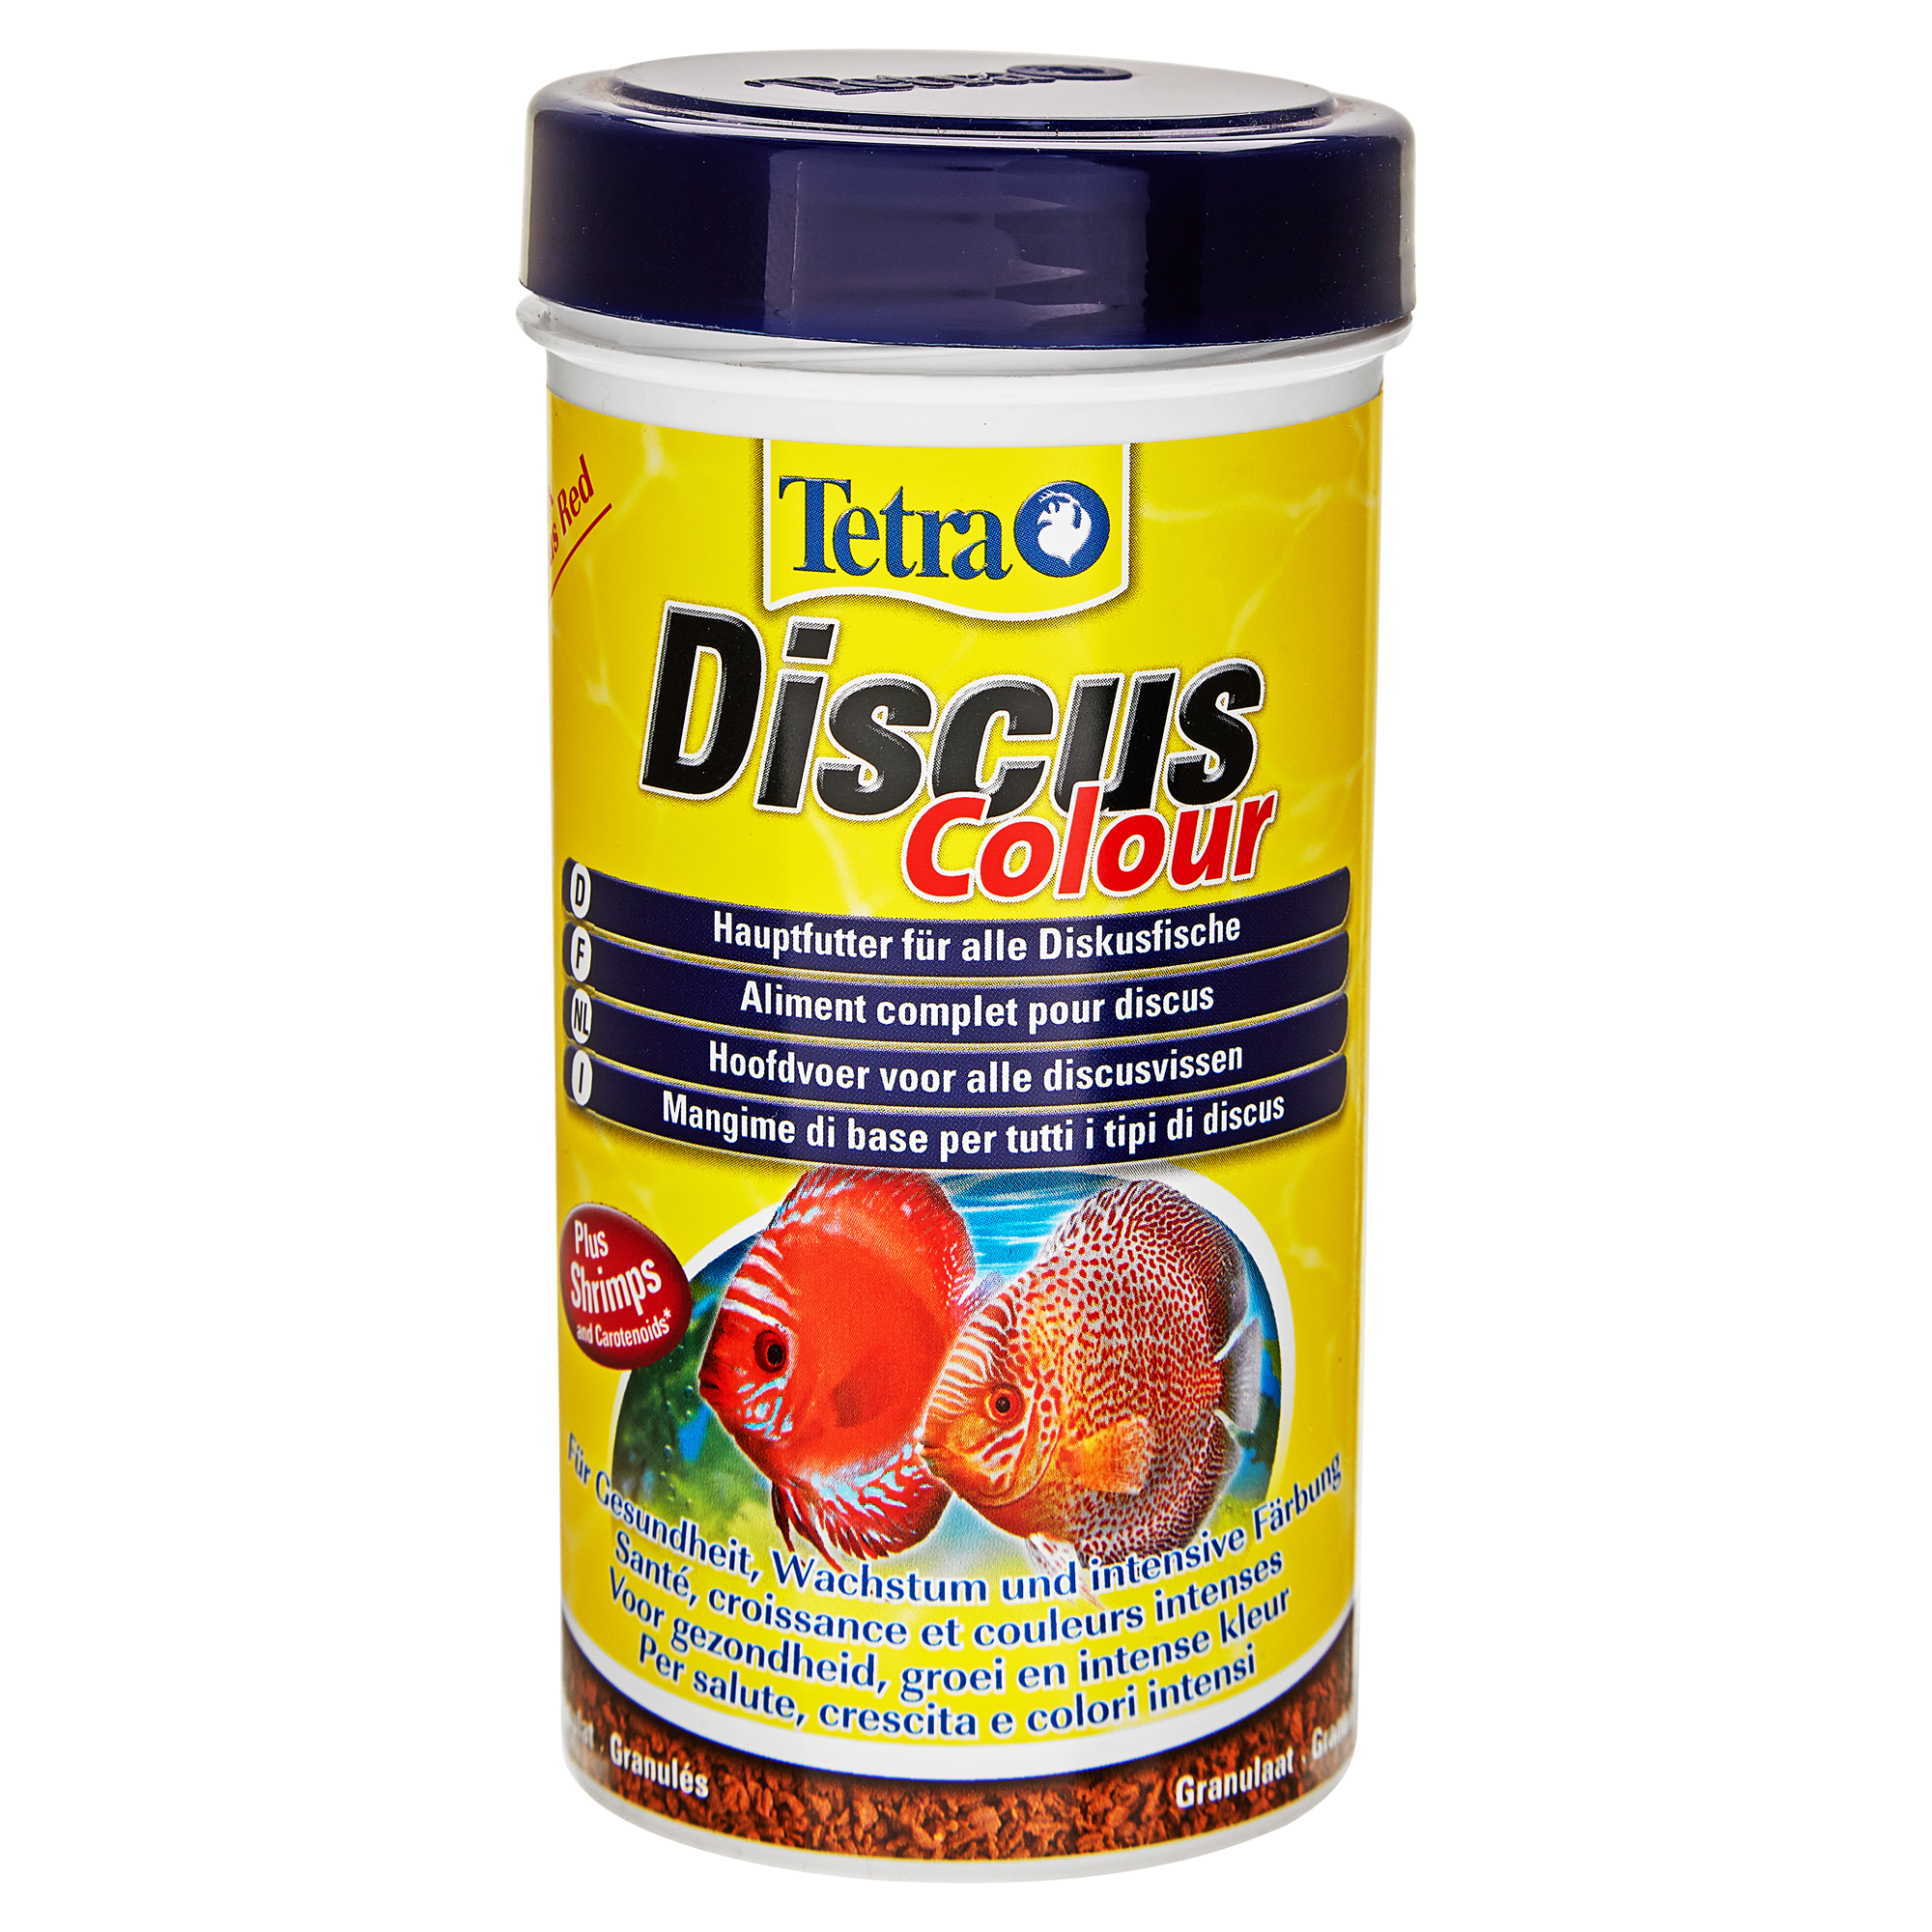 Fischfutter "Discus" Colour 75 g + product picture